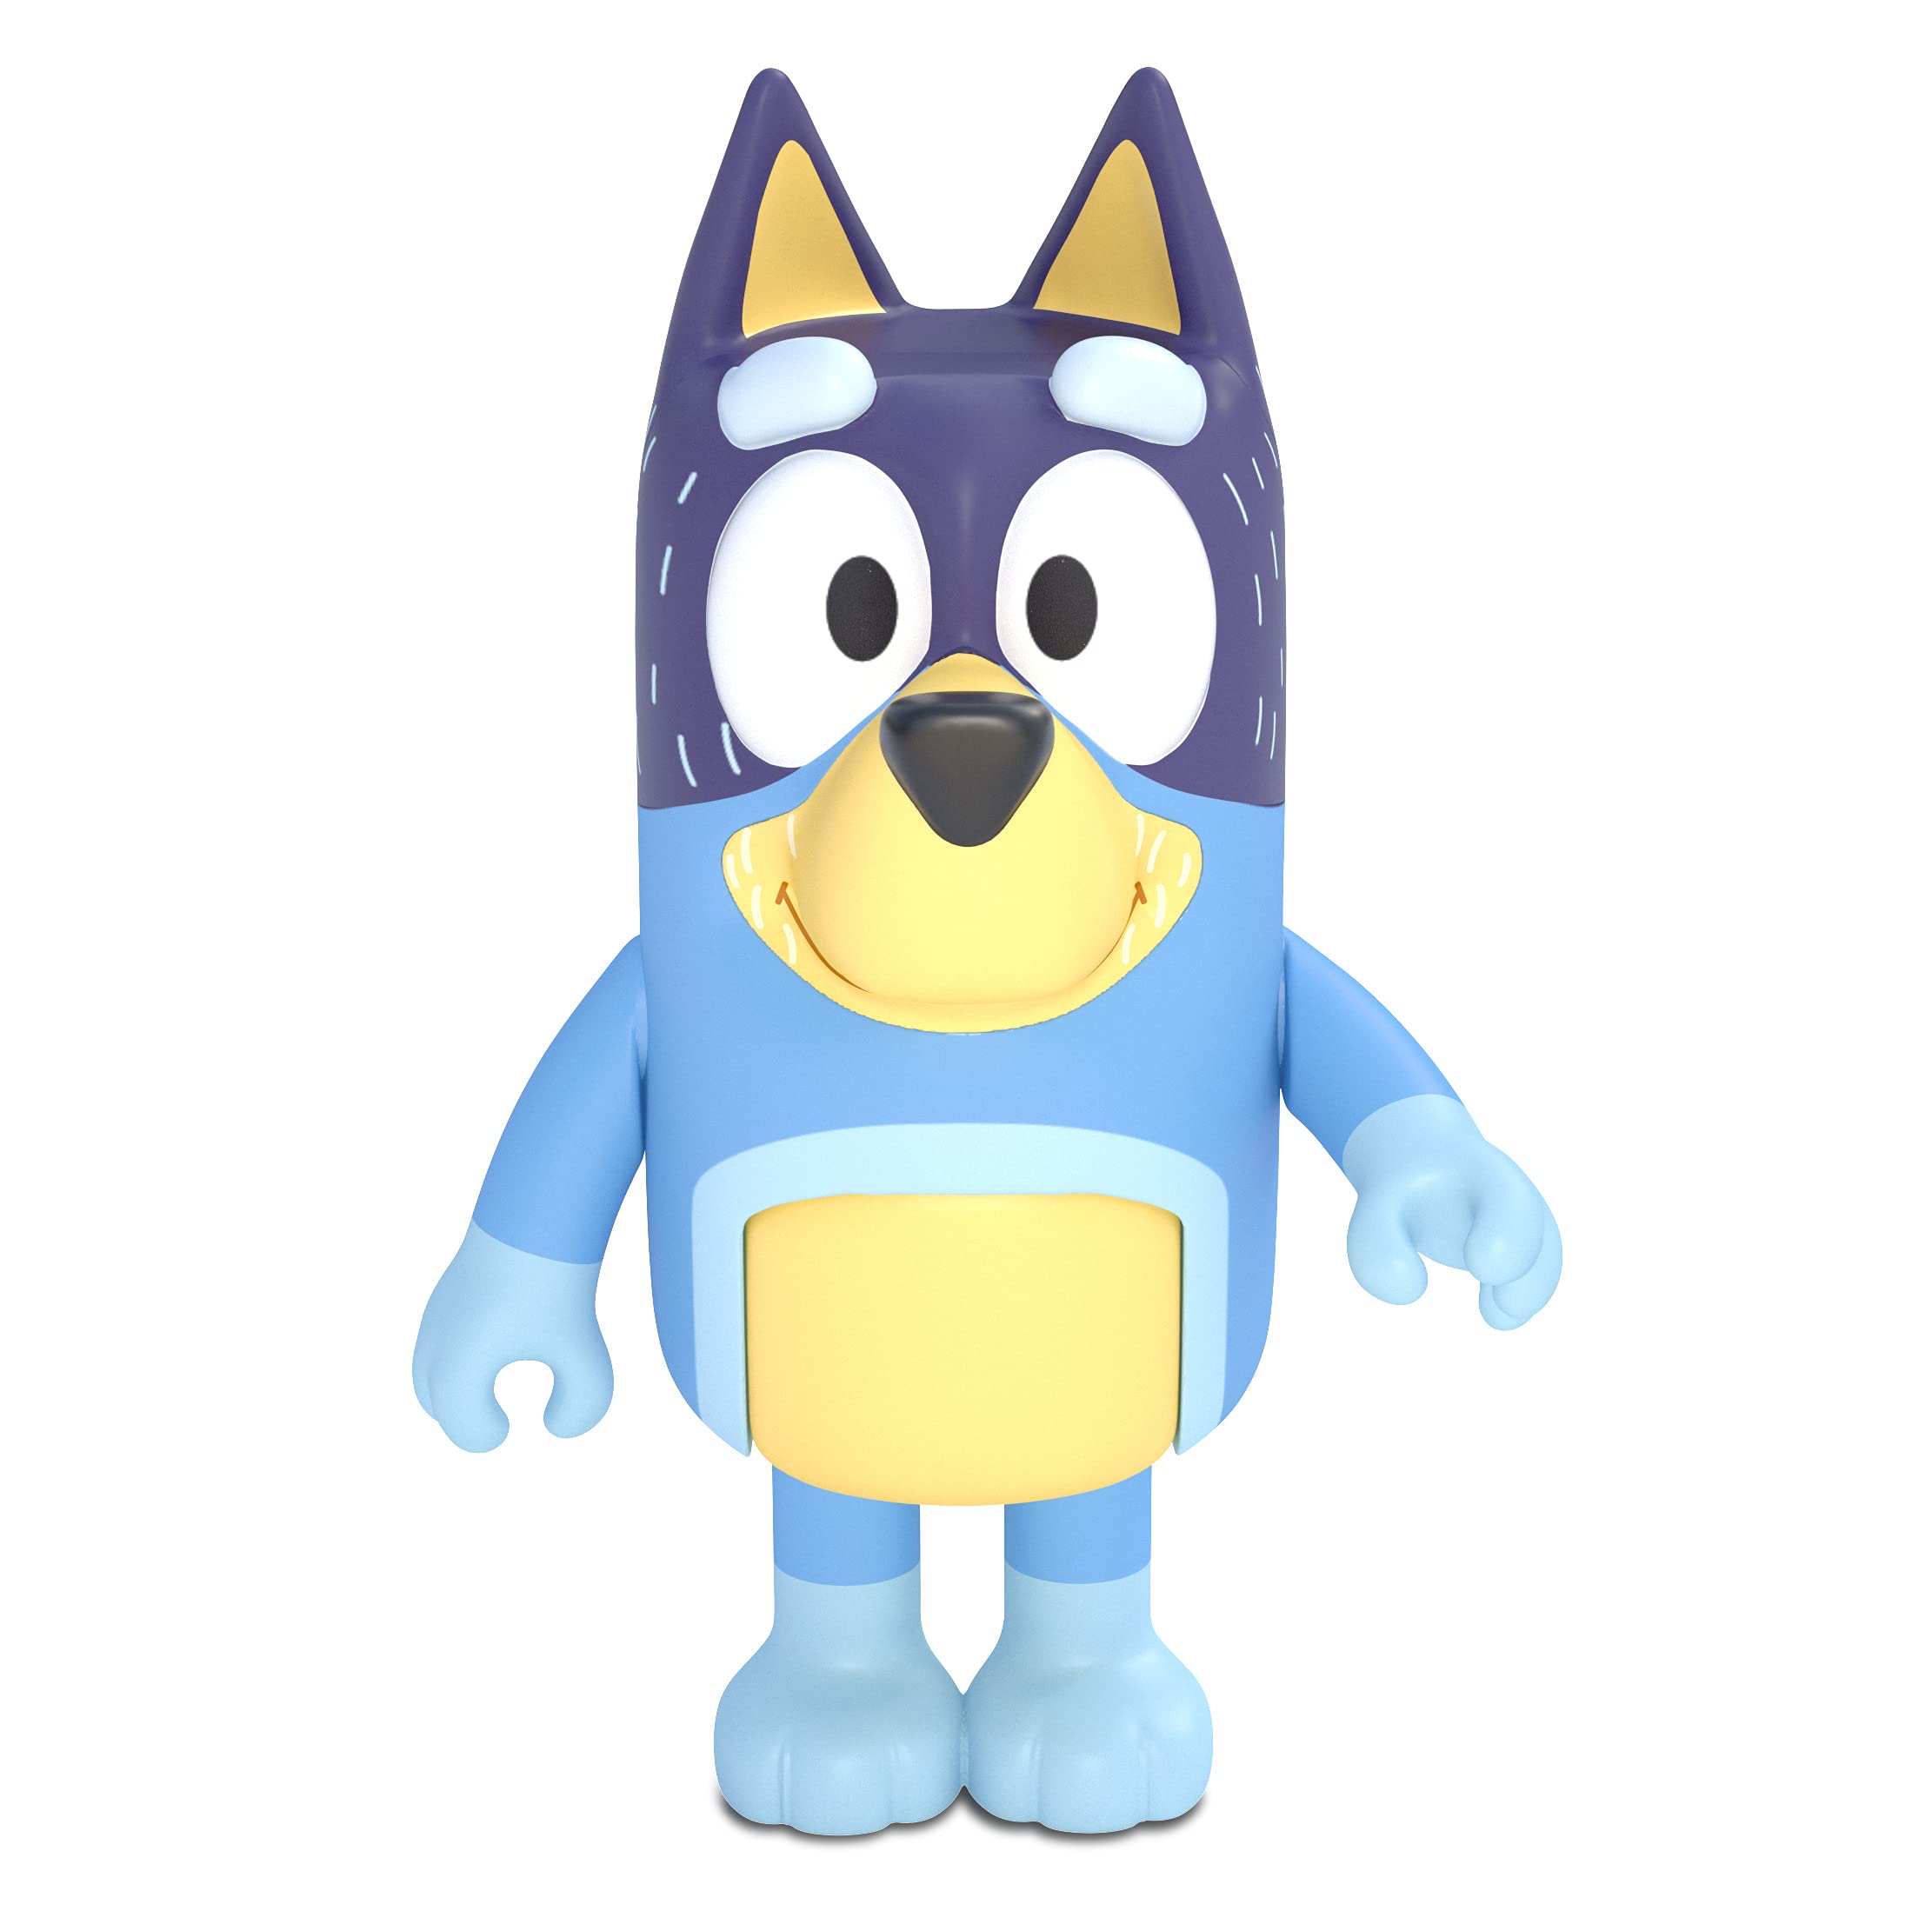 Bluey and Family 4 Pack of 2.5-3